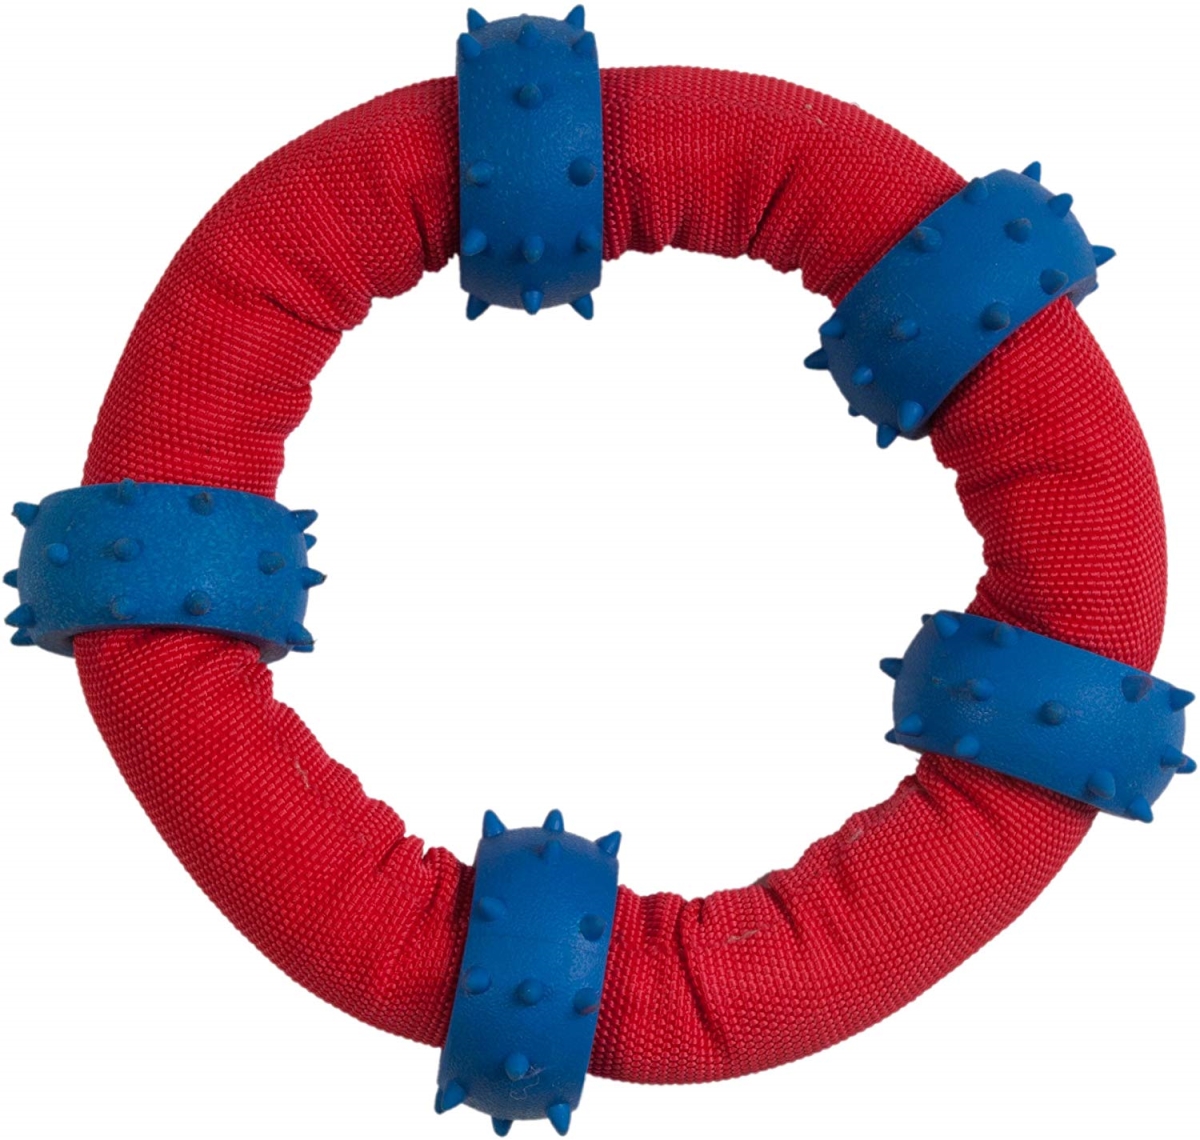 Wb11458 Gladiator Tuff Nylon Tug With Spike Rings Toy For Dogs